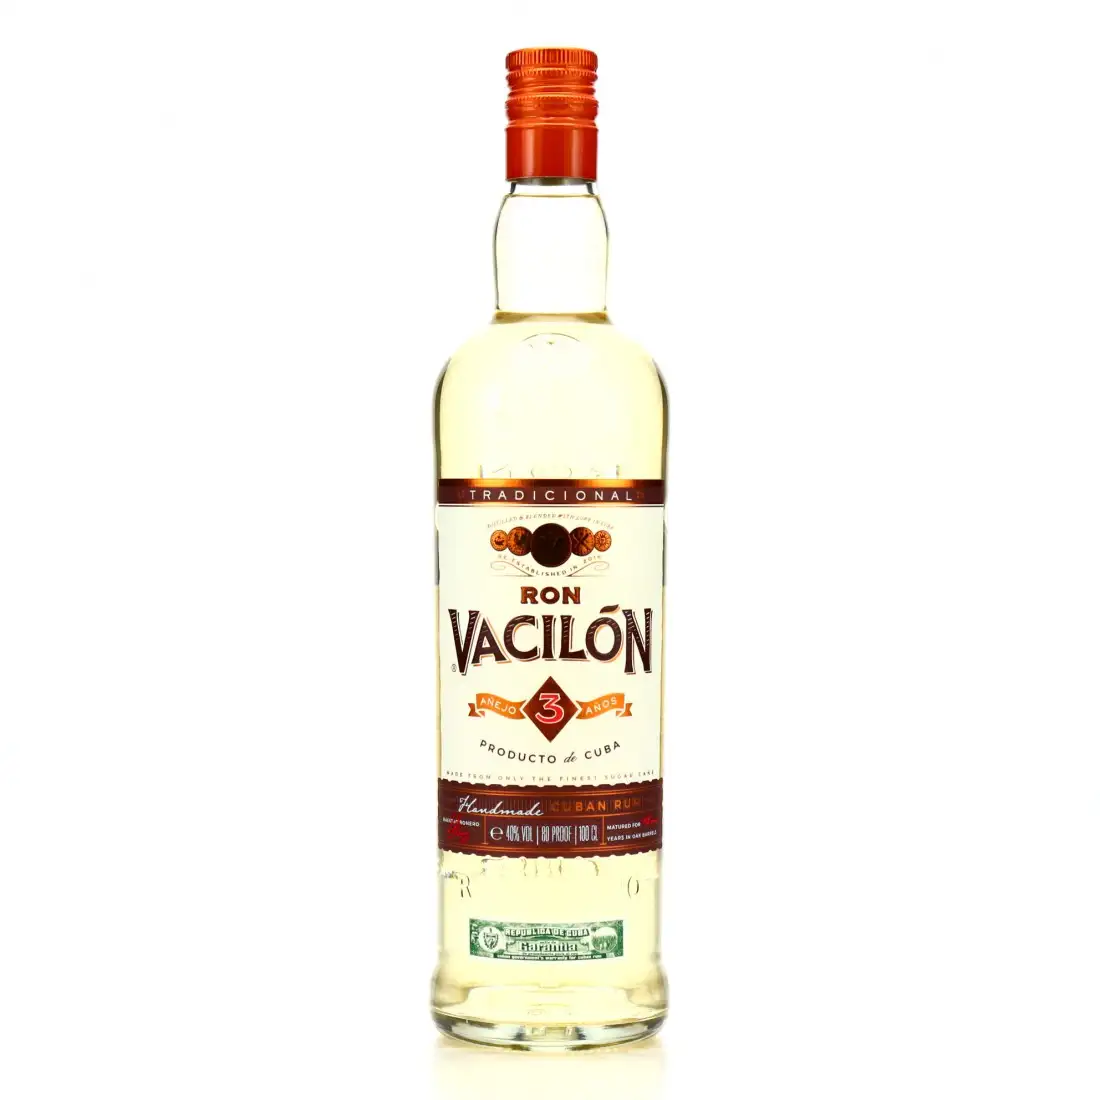 Image of the front of the bottle of the rum Vacilon Ron 3 anos